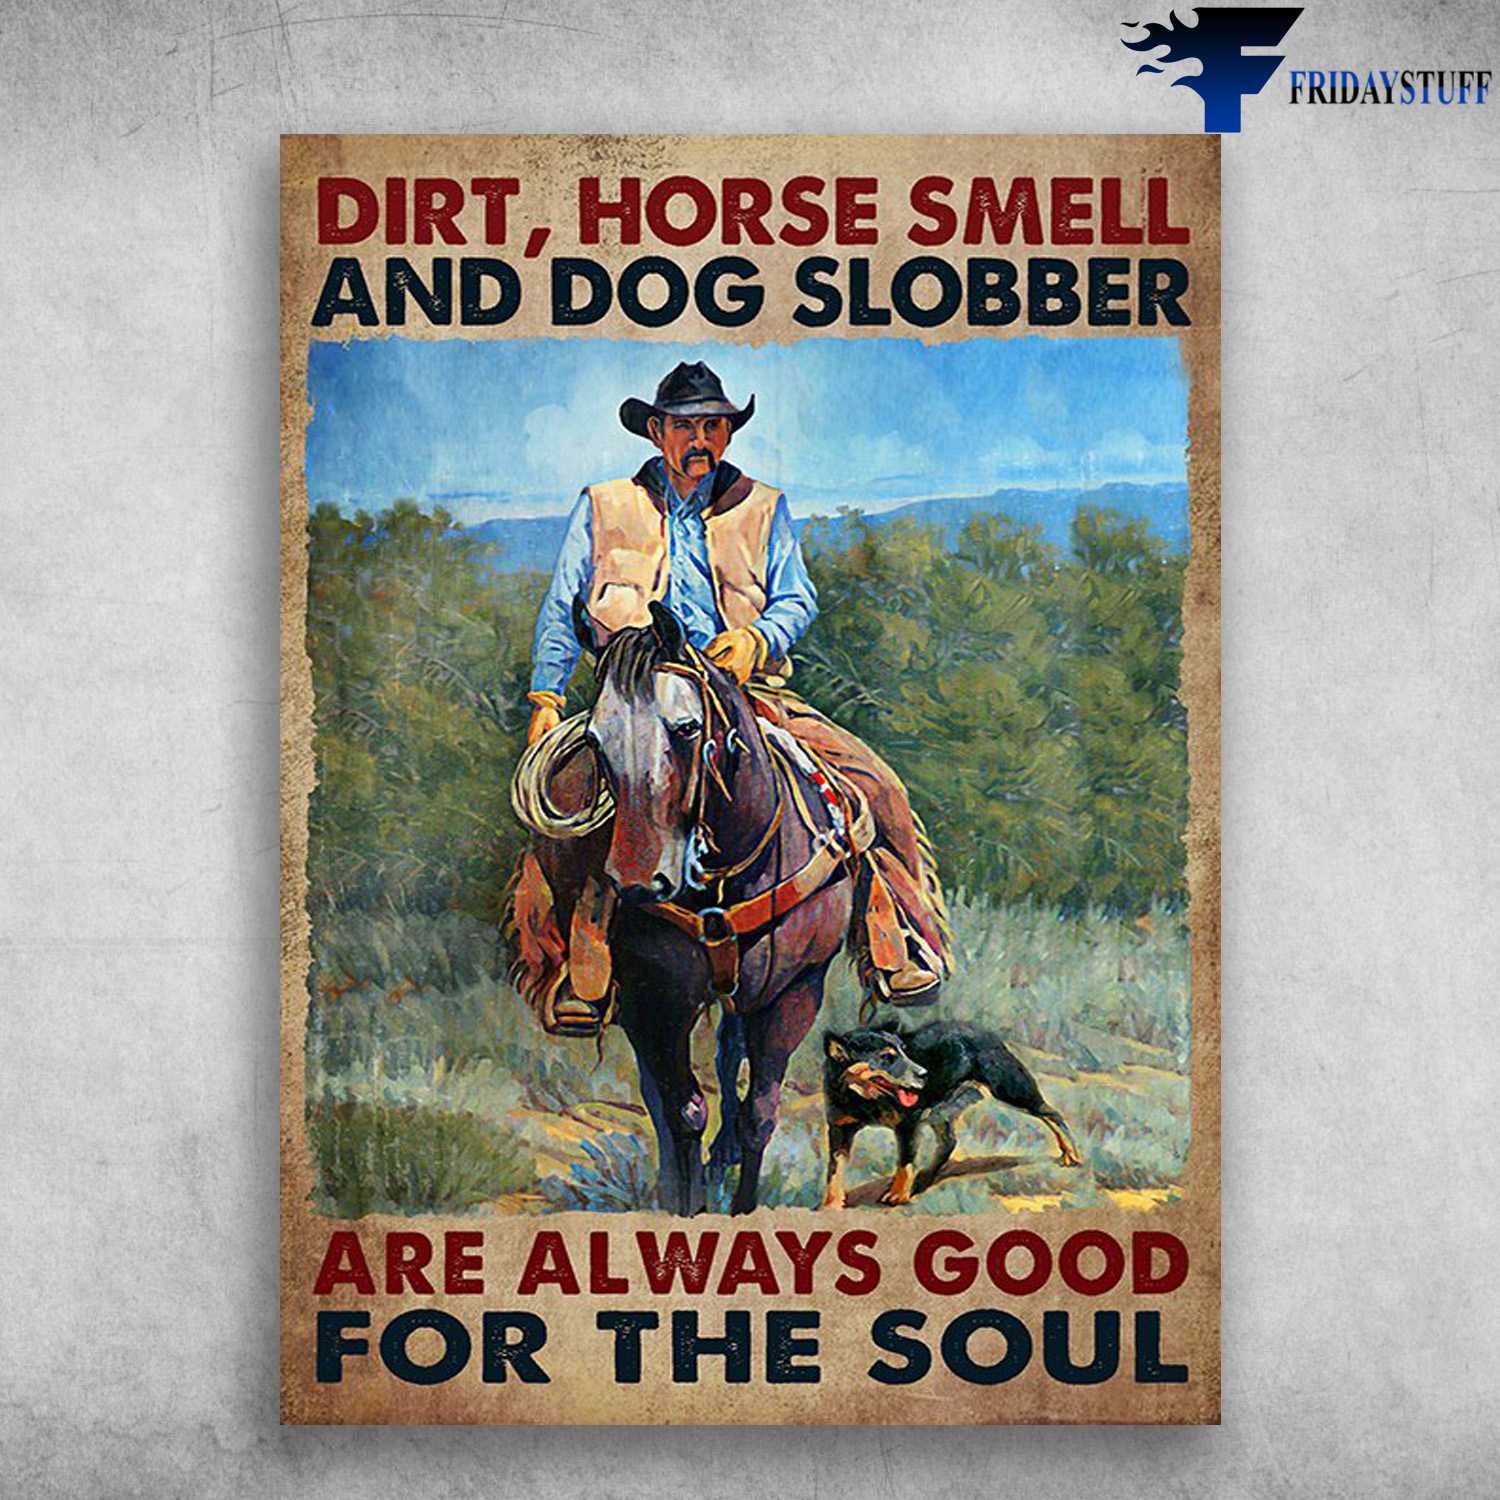 Cowboy And Dog, Horse Riding - Dirt, Horse Smell, And Dog Slobber, Are Always Good For The Soul